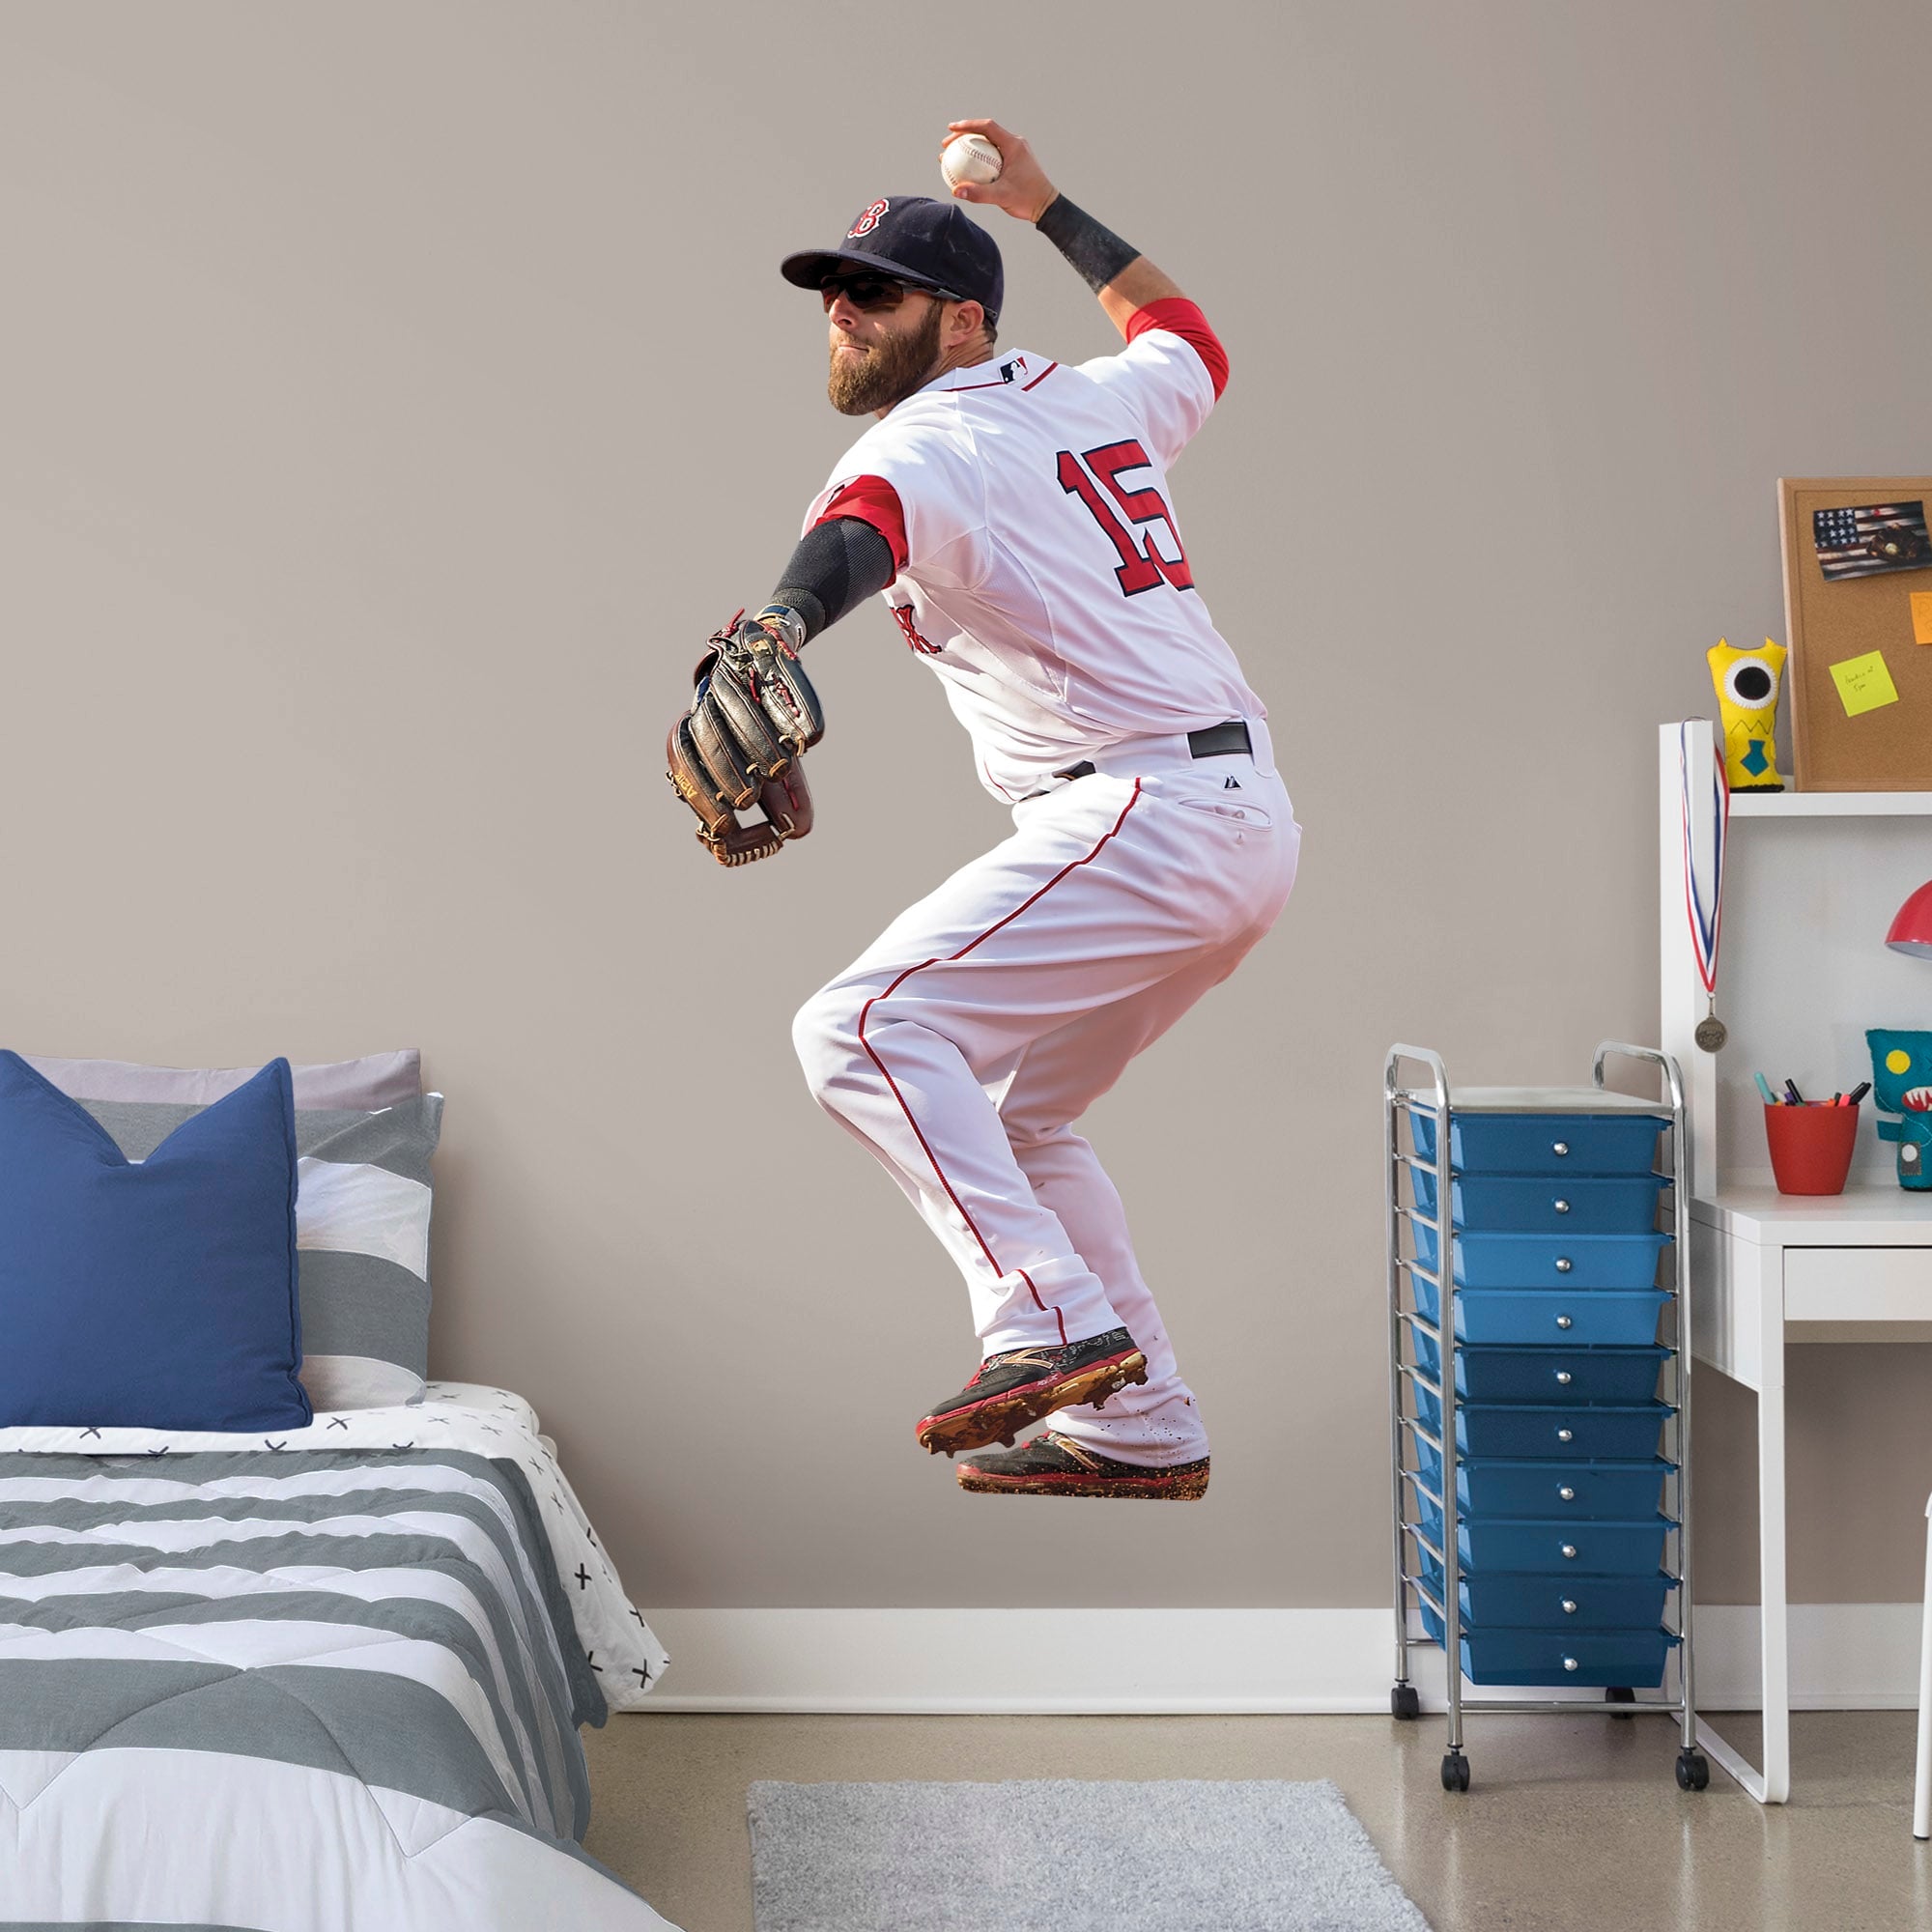 Dustin Pedroia for Boston Red Sox: Throwing - Officially Licensed MLB Removable Wall Decal Giant Athlete + 2 Decals (24"W x 51"H